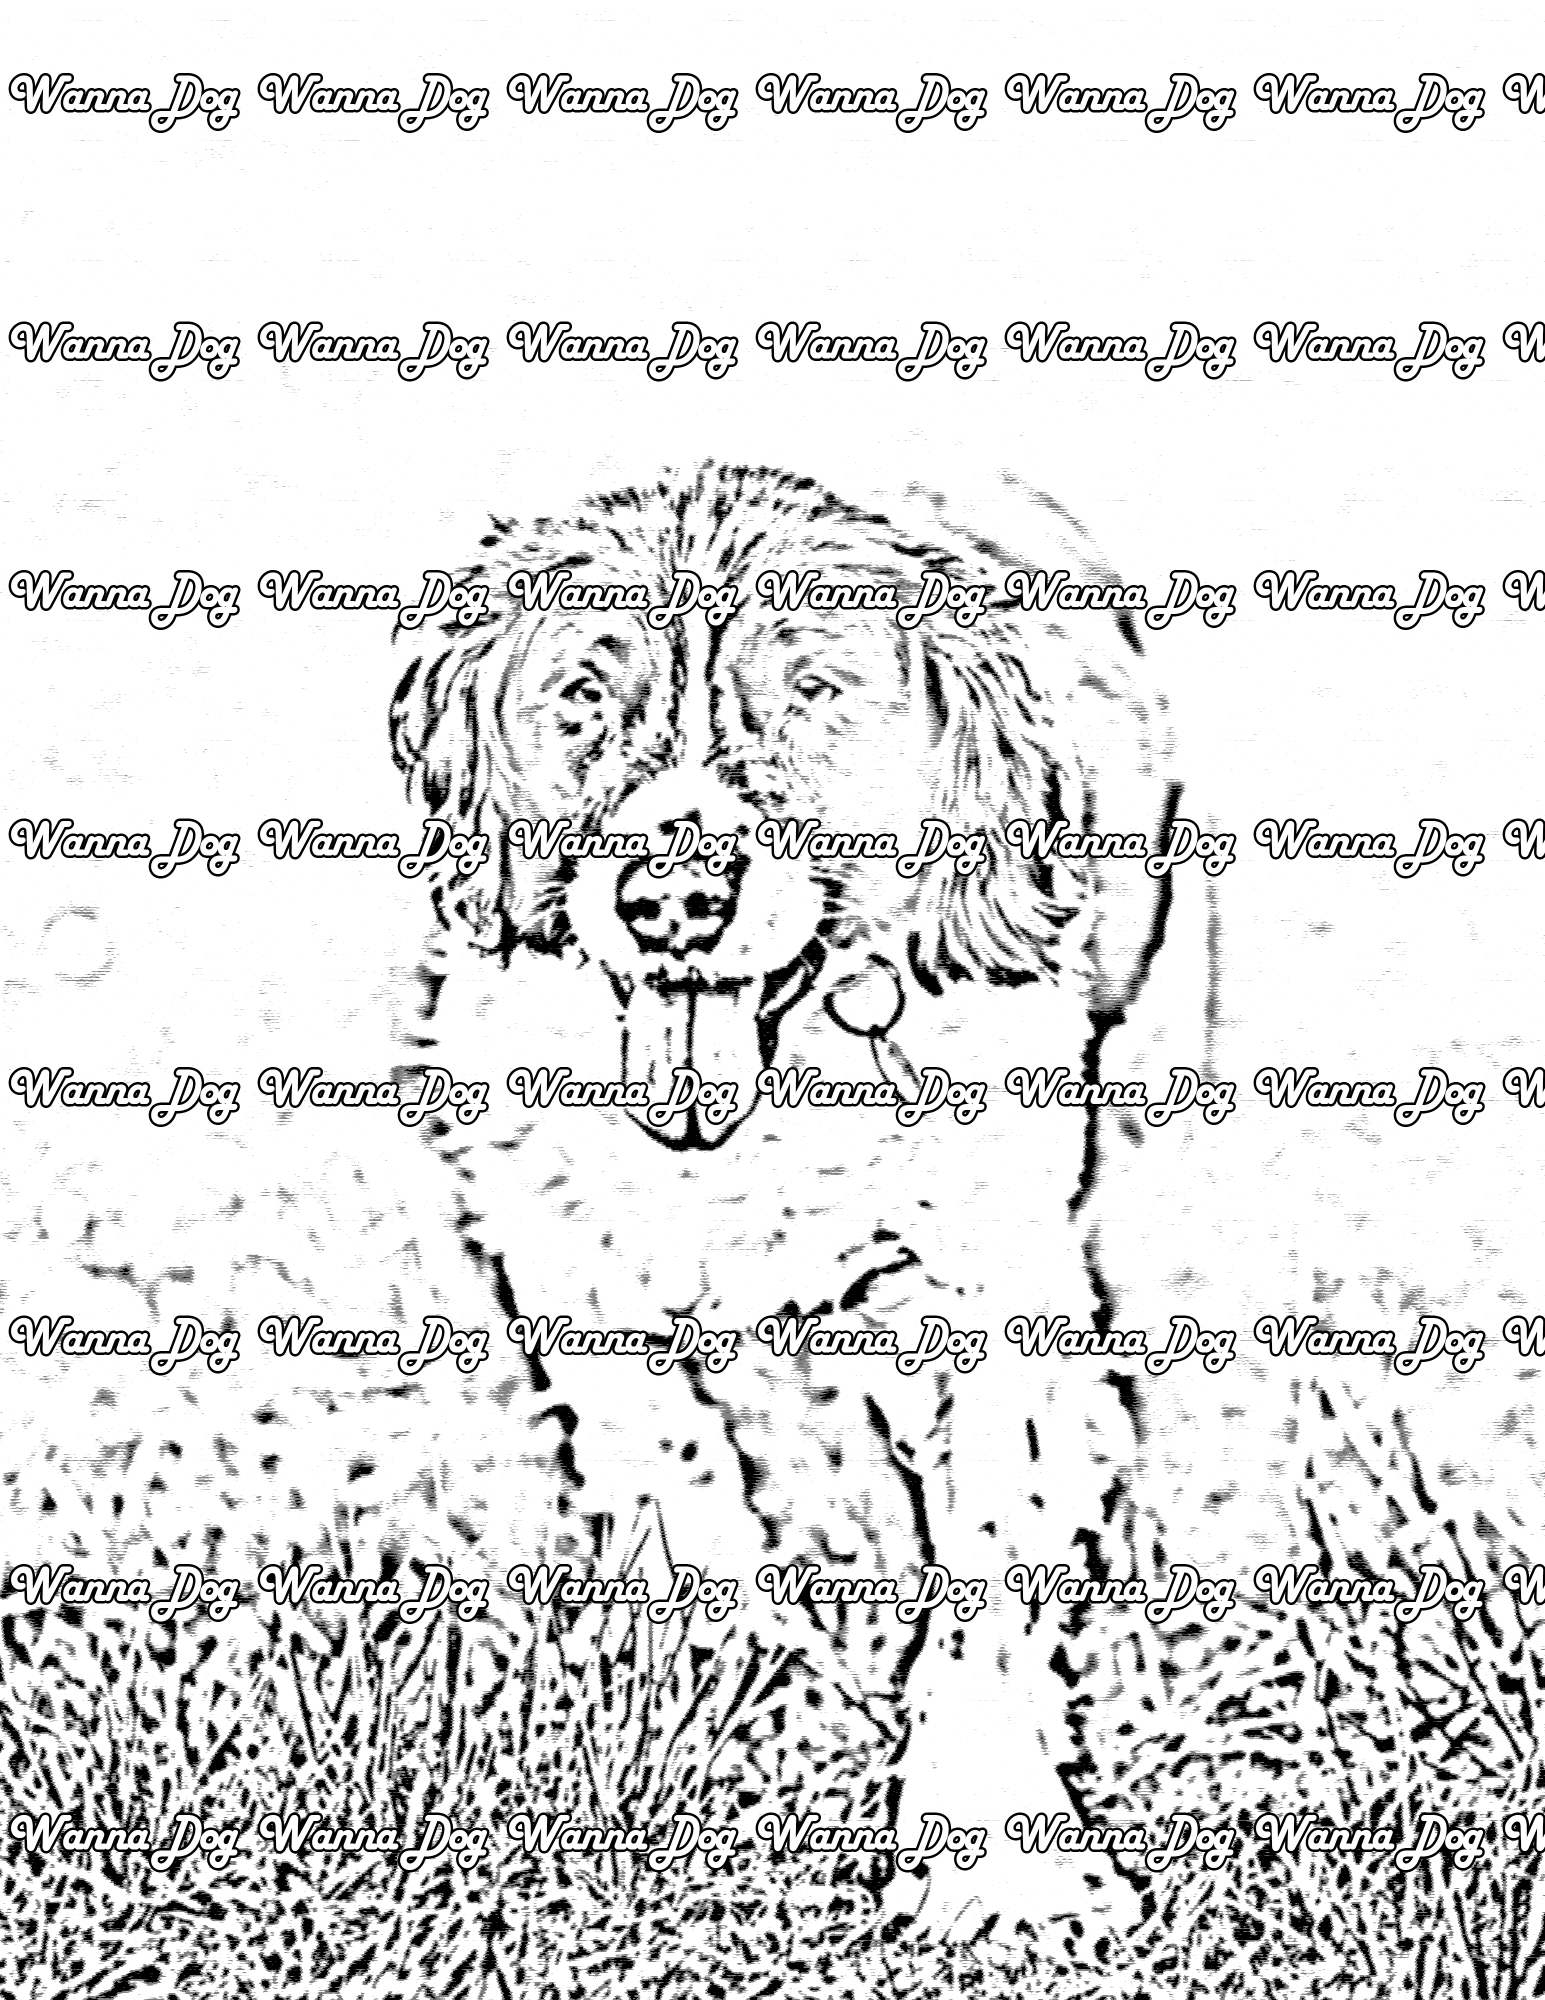 English Springer Spaniel Coloring Page of a English Springer Spaniel walking with their tongue out